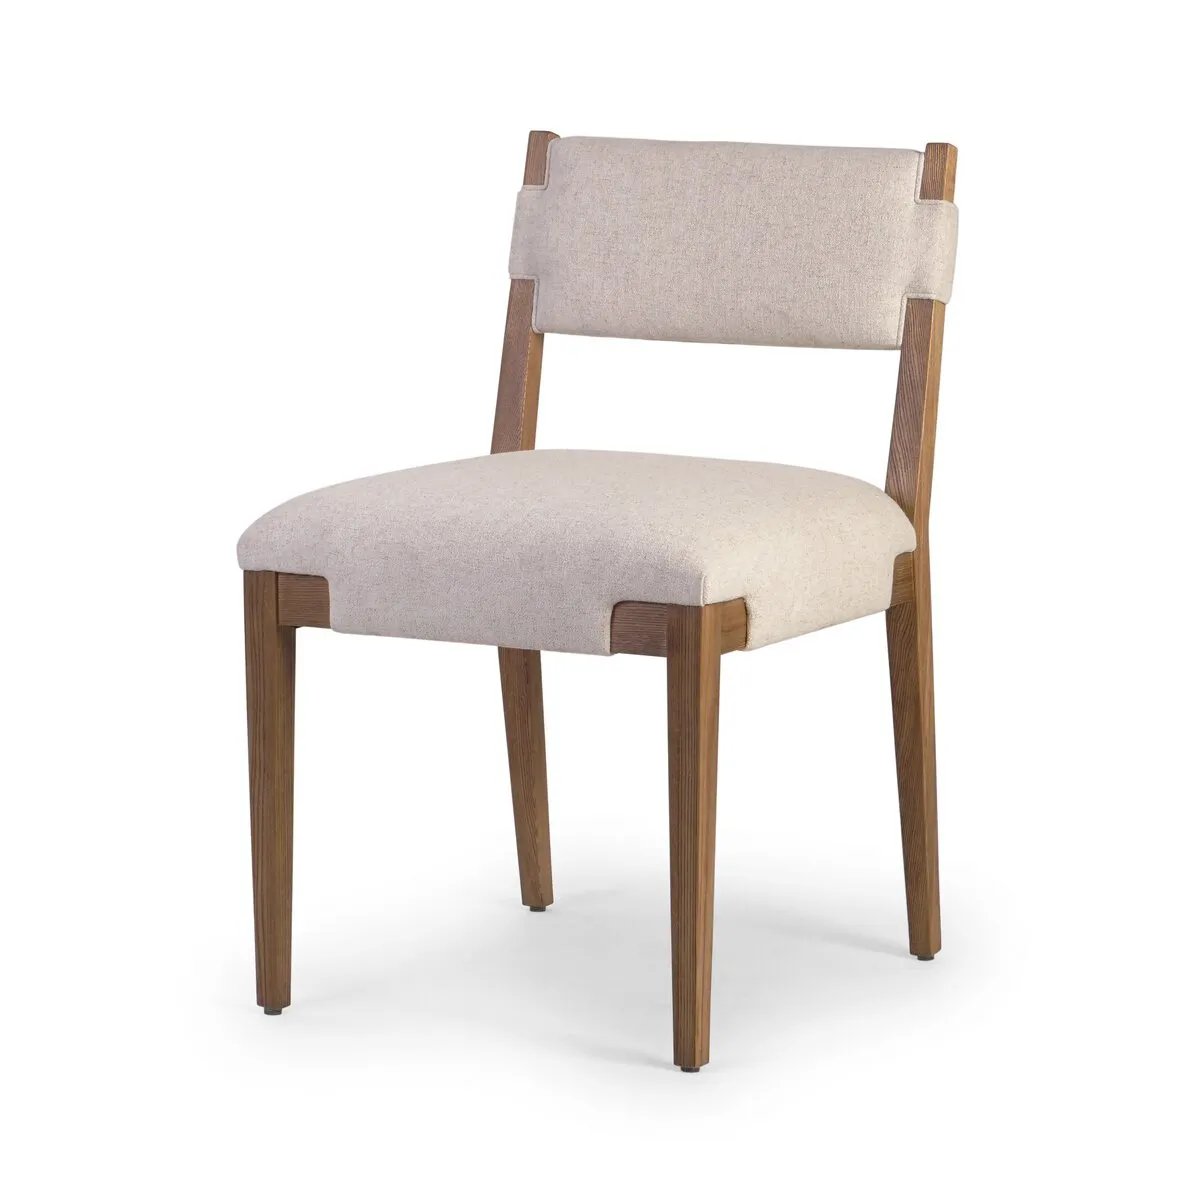 Expertly crafted from natural materials, the Tamari Antwerp Dining Chair is the perfect addition to any dining room. With a sturdy design and comfortable seat, this chair offers both functional and aesthetic appeal. Shipping on 5/16/2024 - order now to elevate your dining experience Amethyst Home provides interior design, new home construction design consulting, vintage area rugs, and lighting in the Austin metro area.